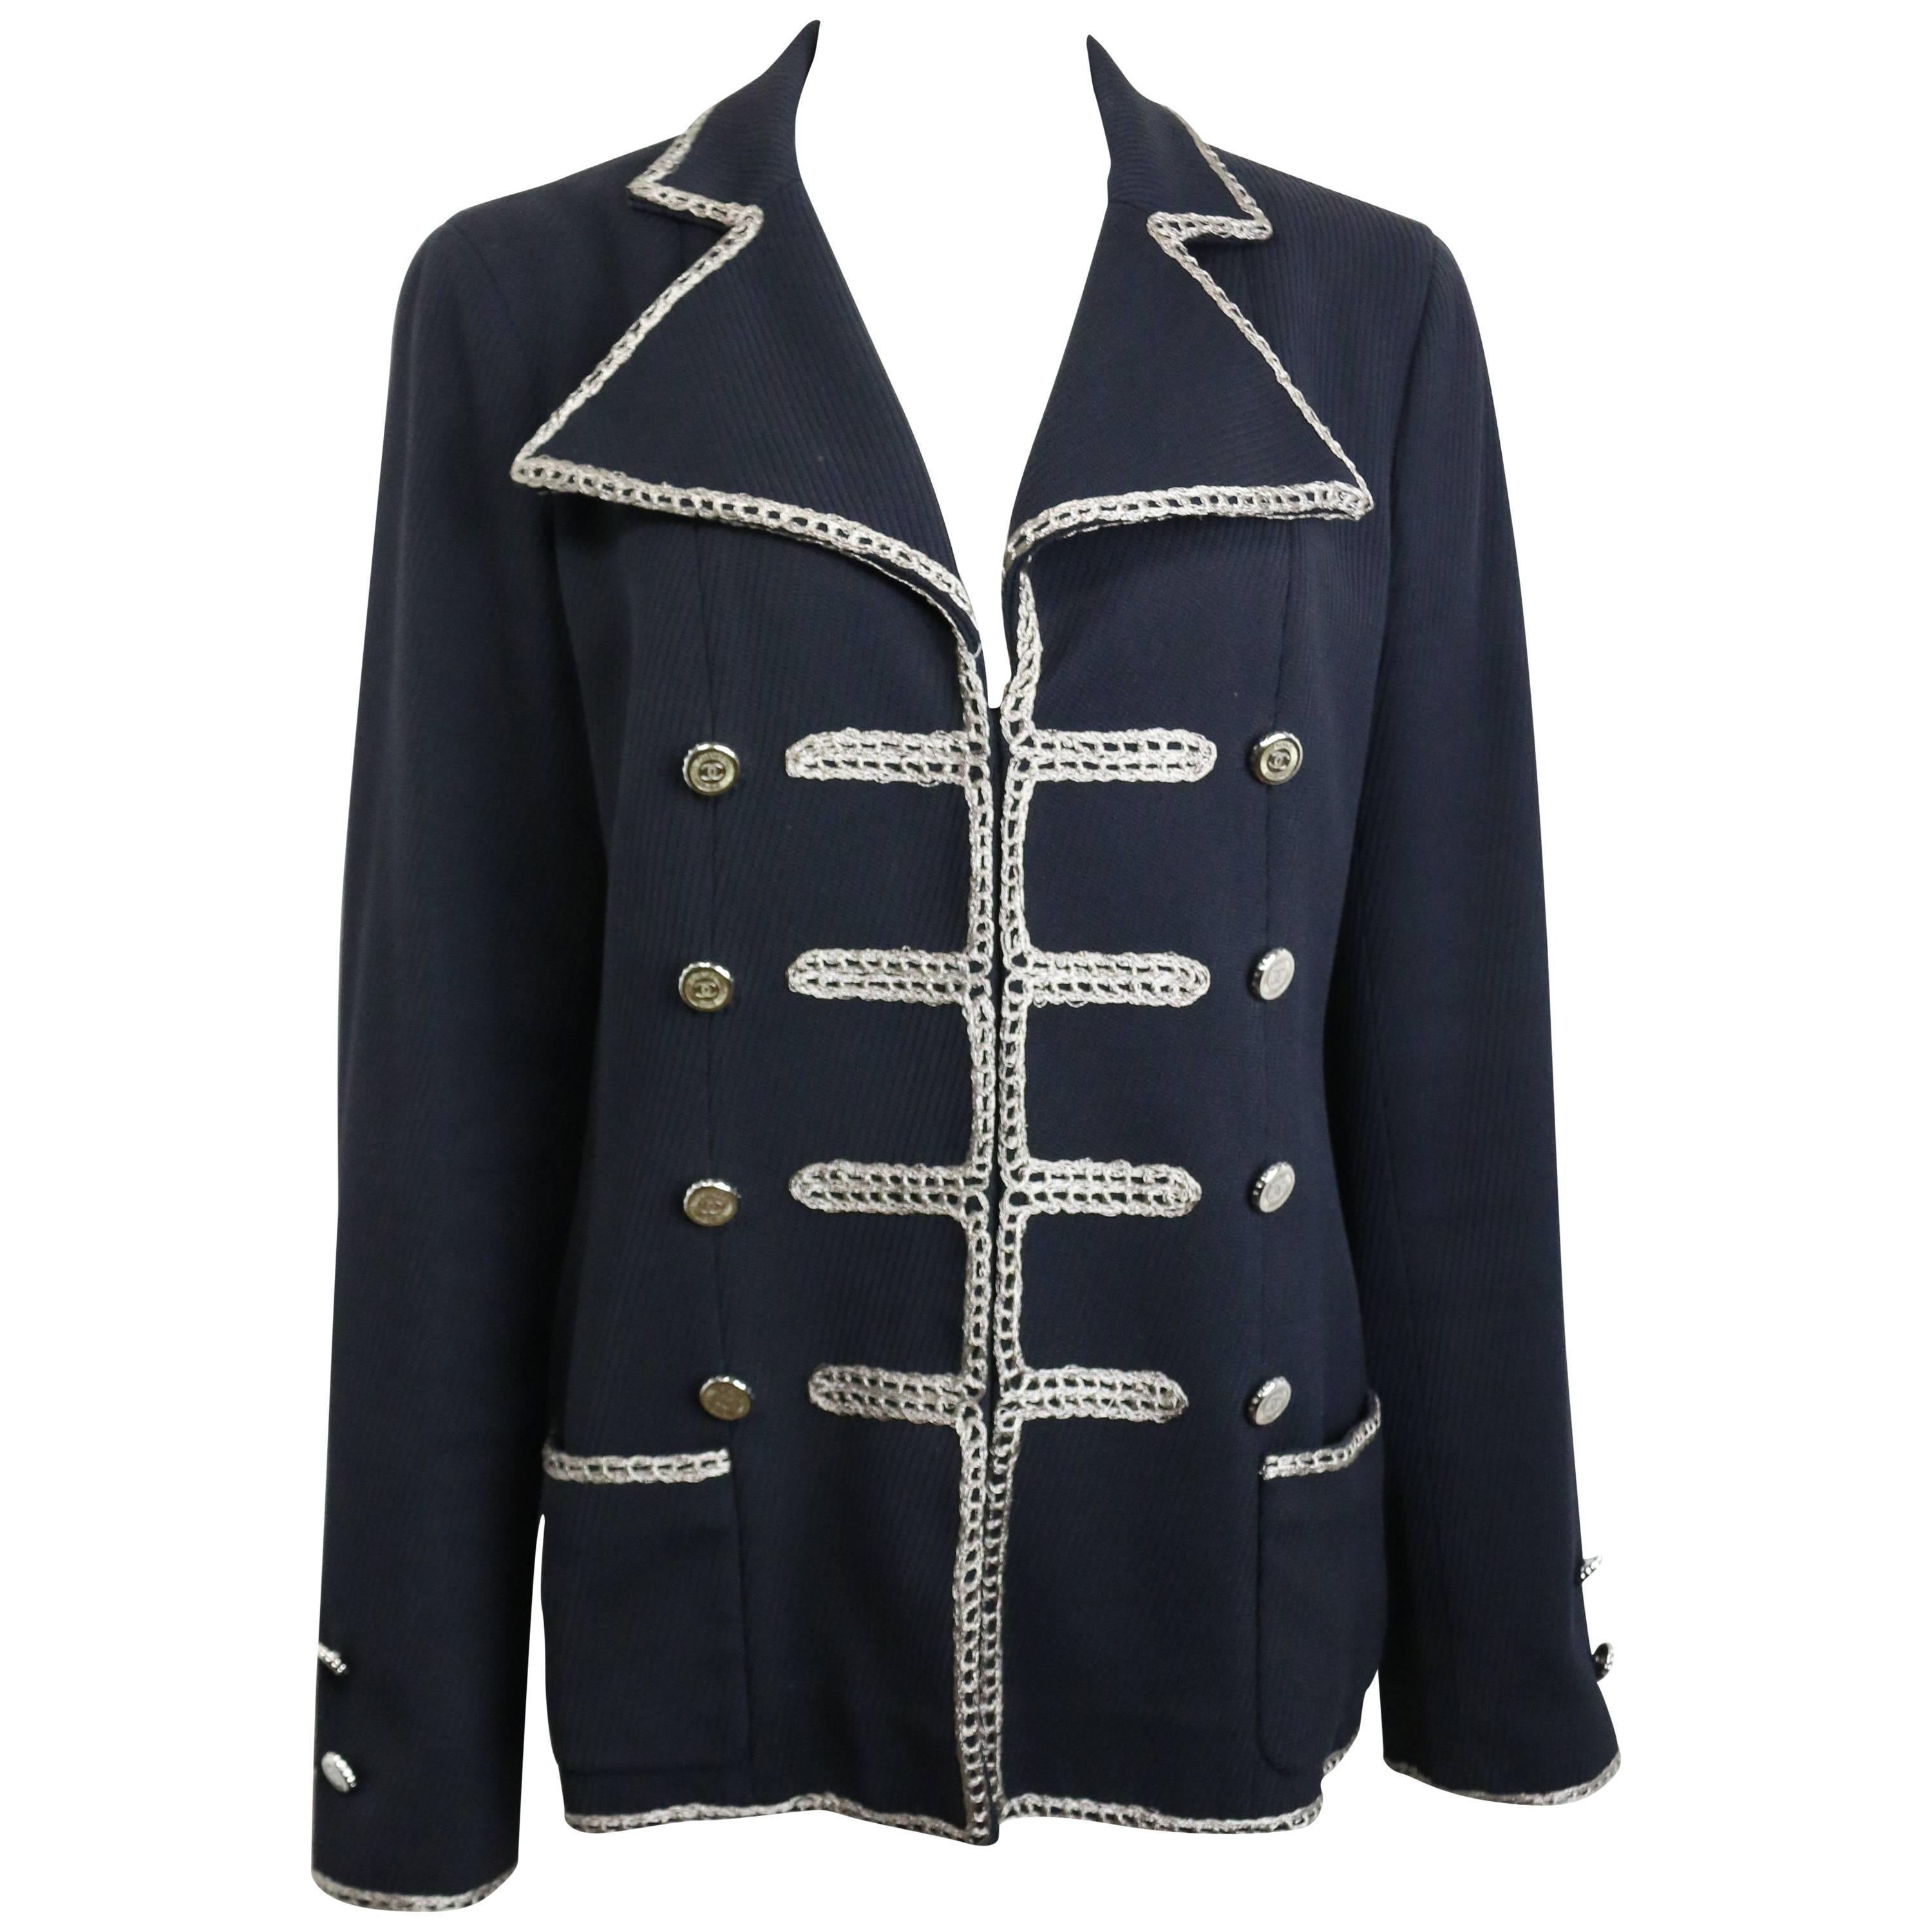 Chanel Black Military with Silver Metallic Thread Embroidered Blazer 